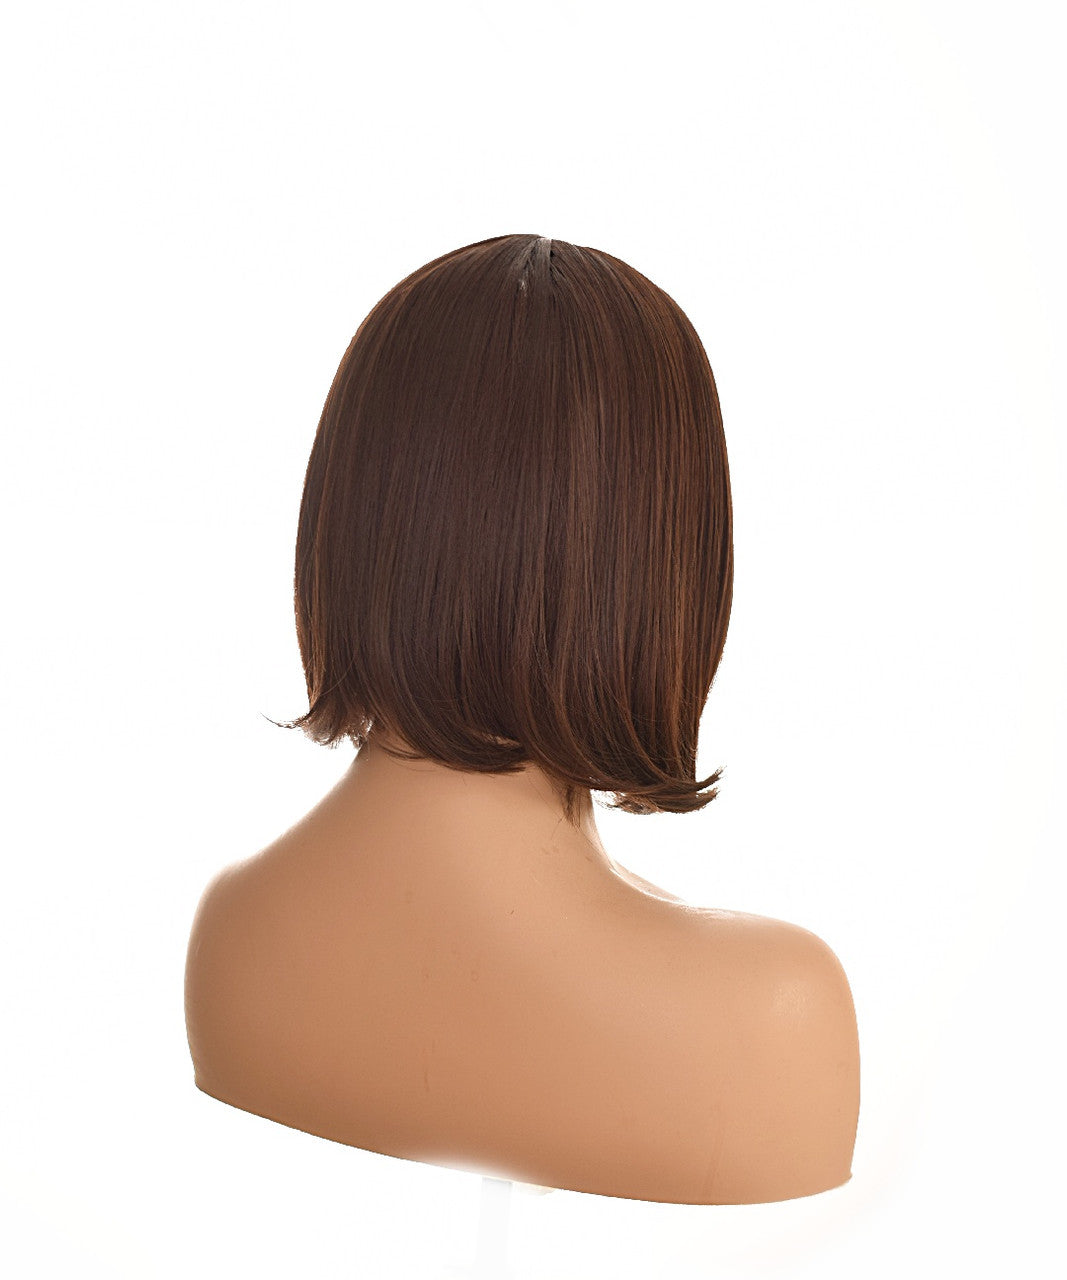 Dark Brown Bobbed Hairstyle Wig. Piper wig